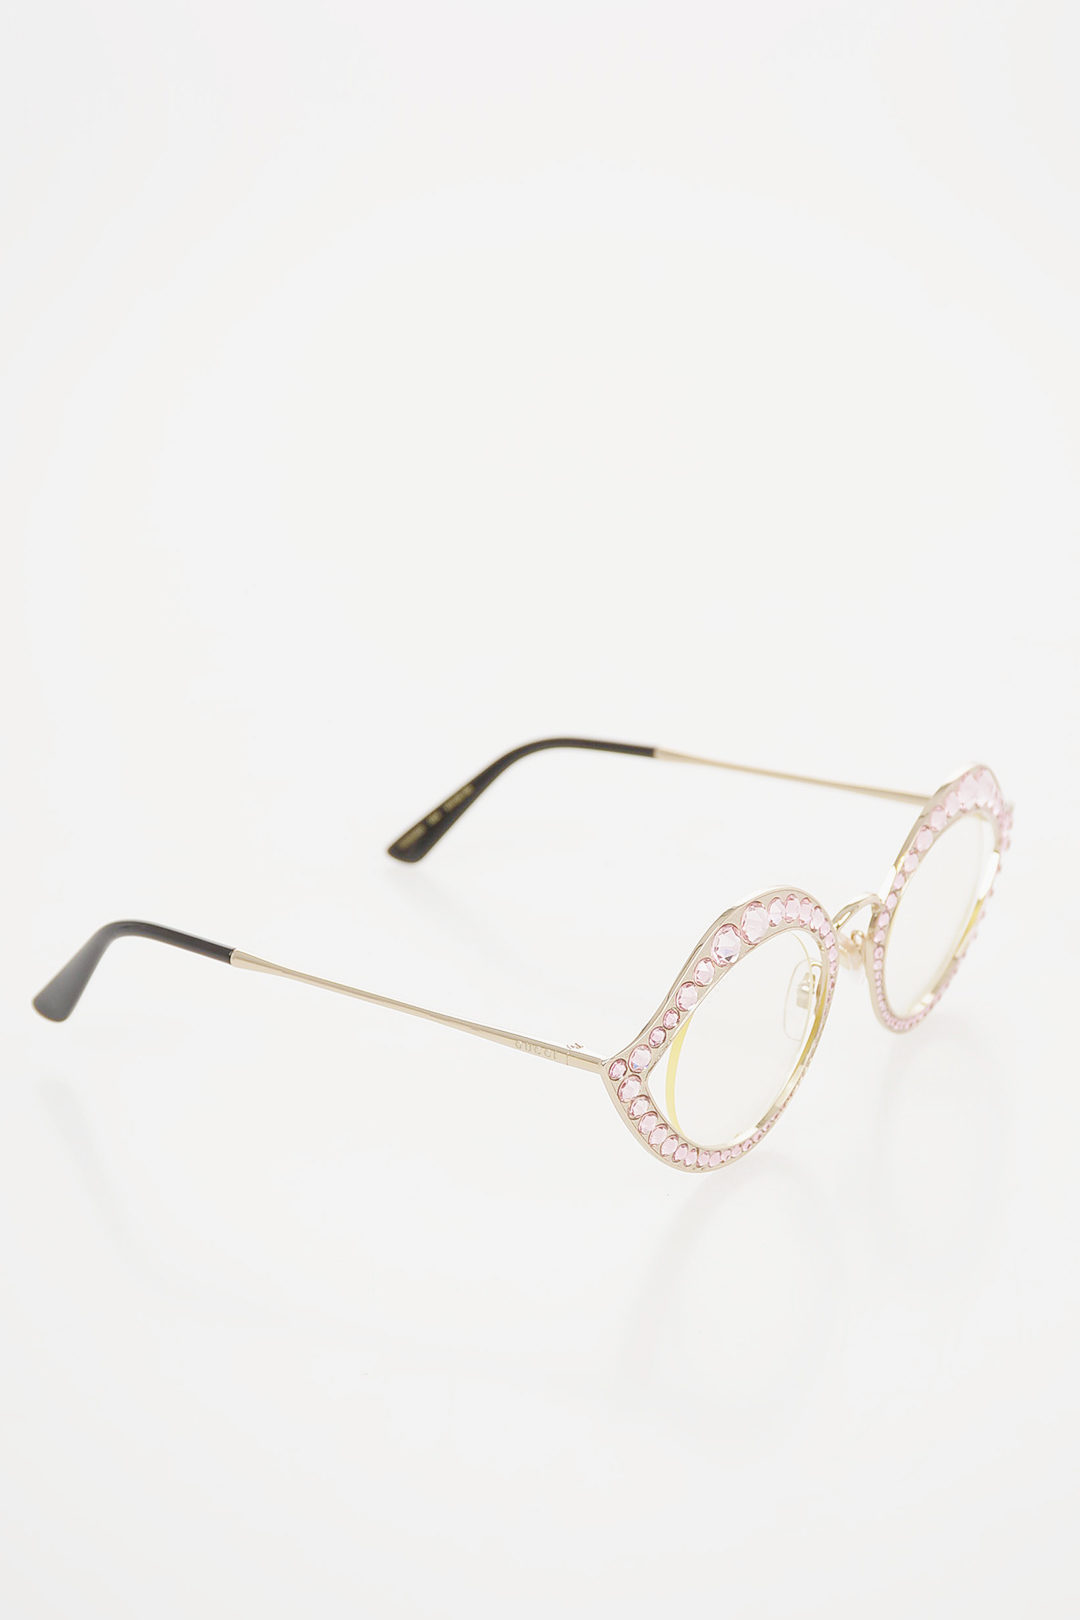 Amazon Pink badazzle glasses - $20 (33% Off Retail) - From Ava